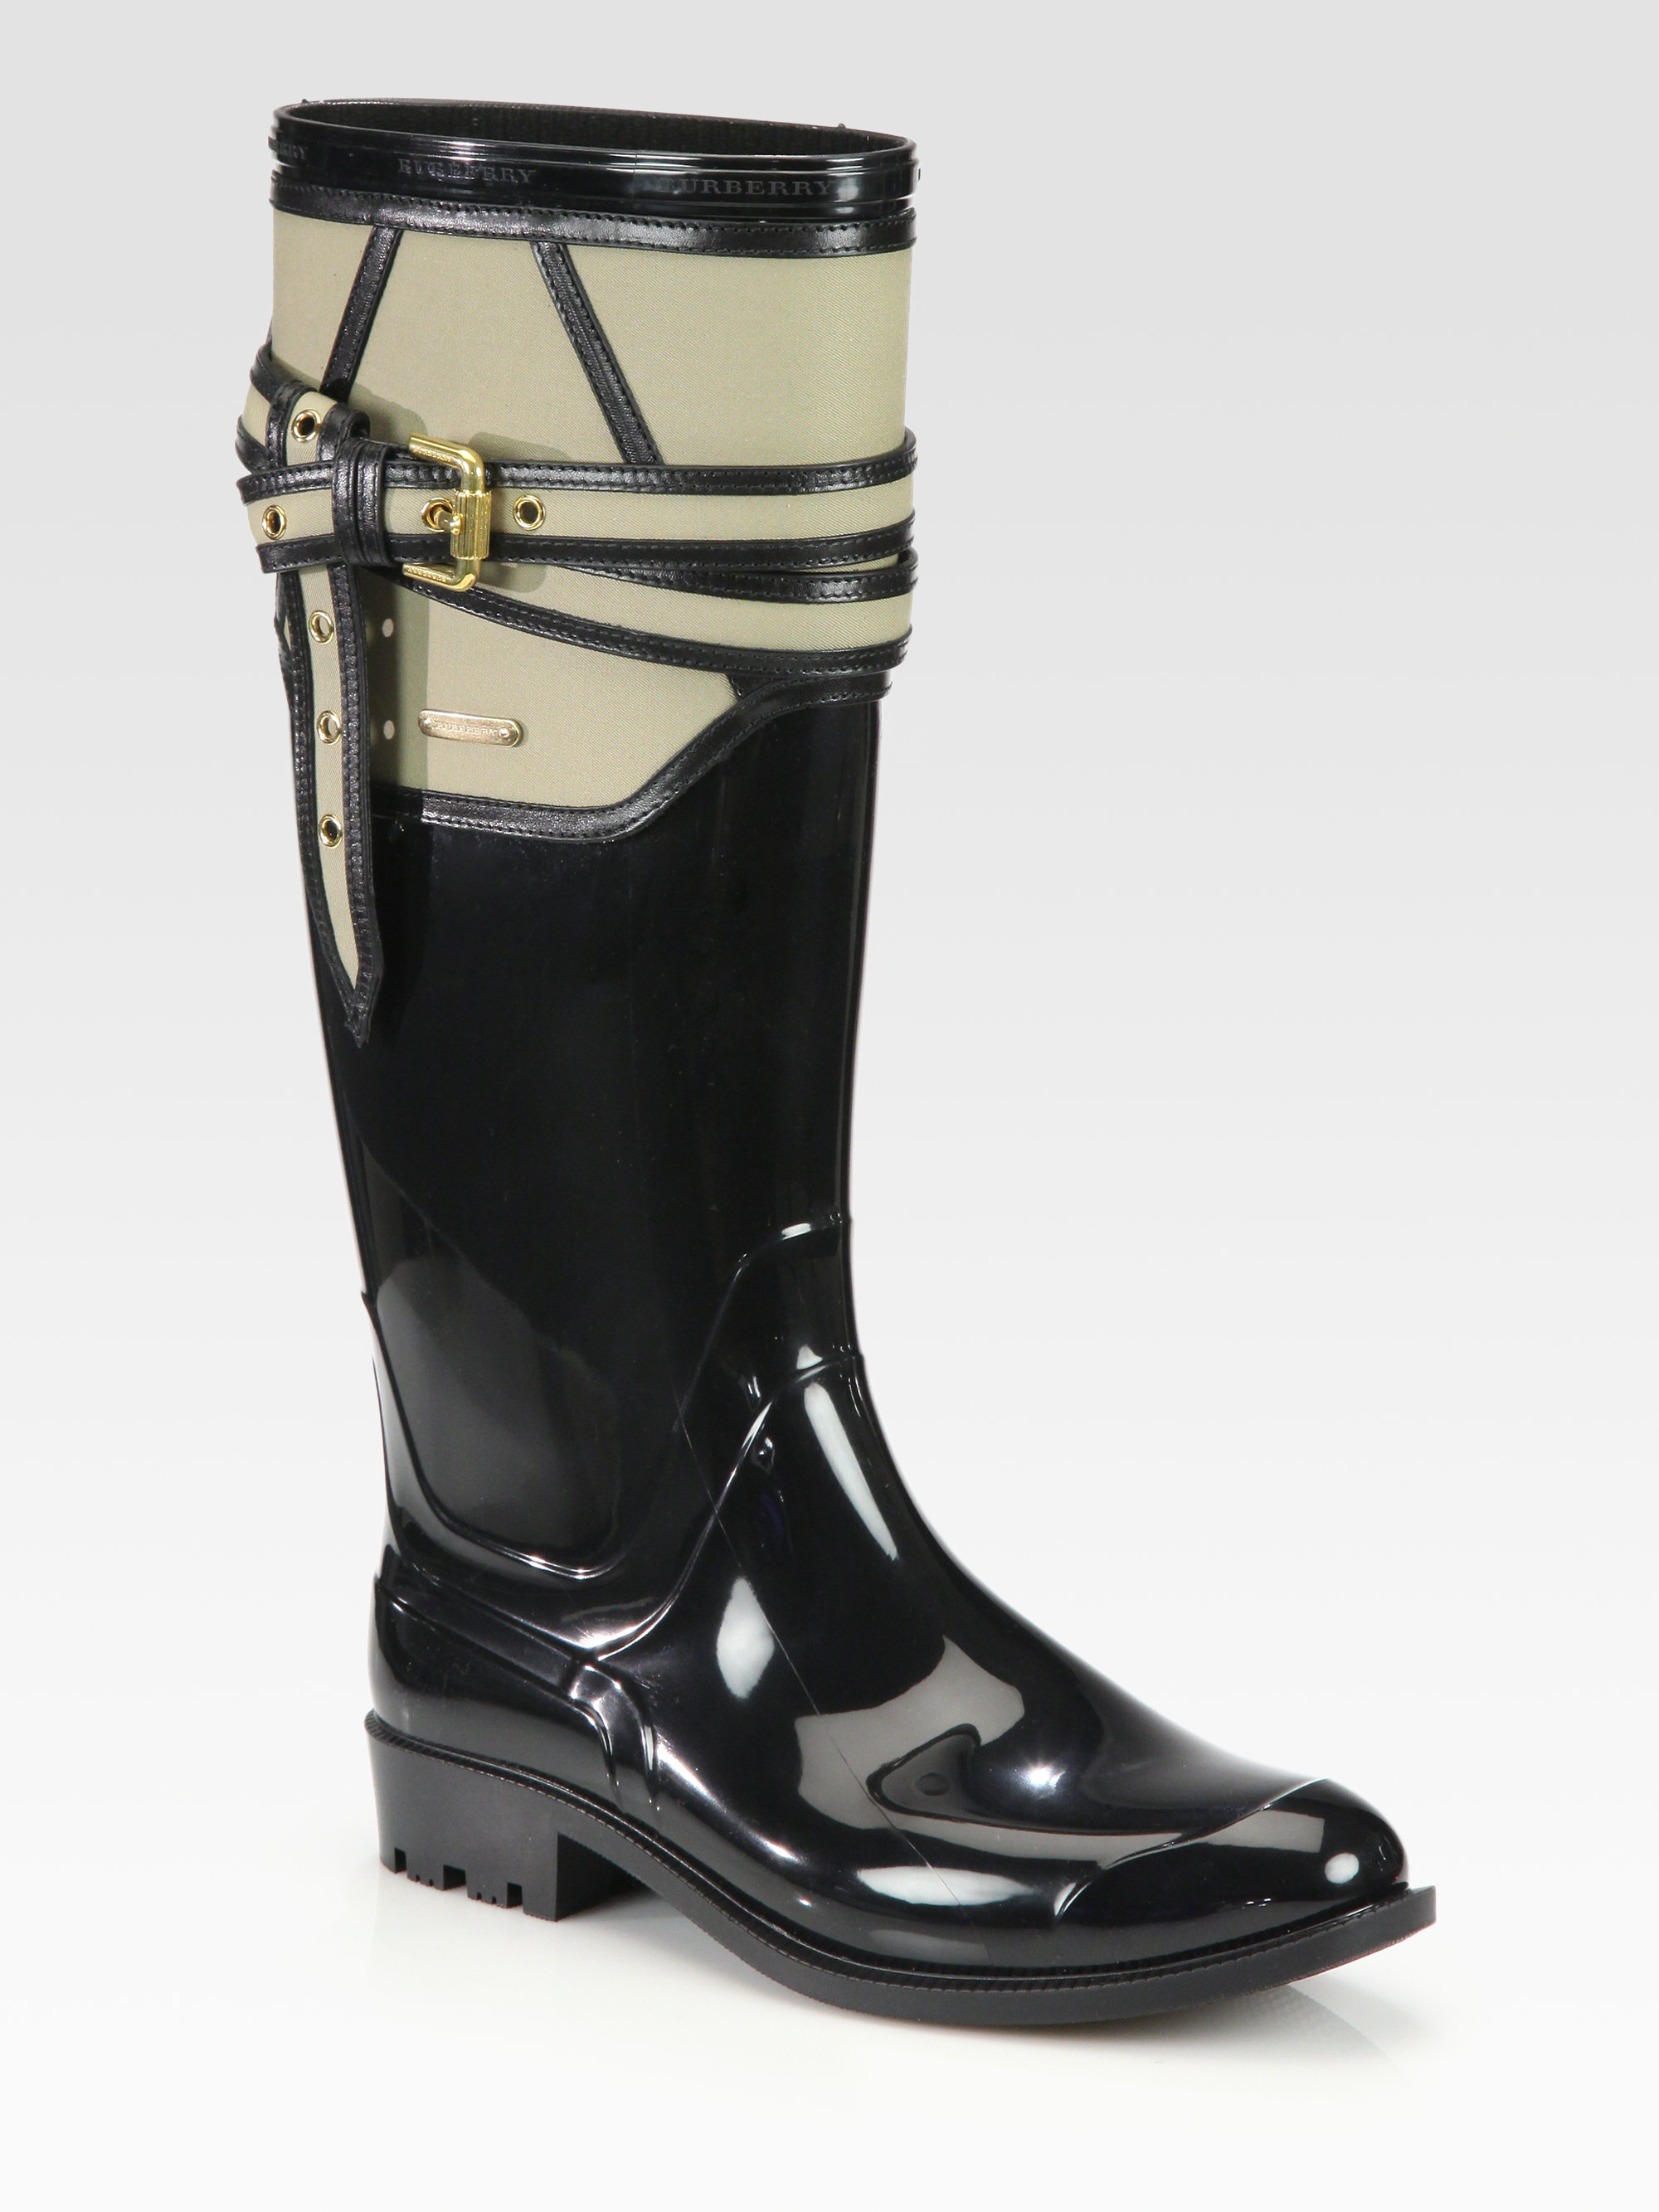 Burberry Willesden Leathertrimmed Rain Boots in Black - Lyst